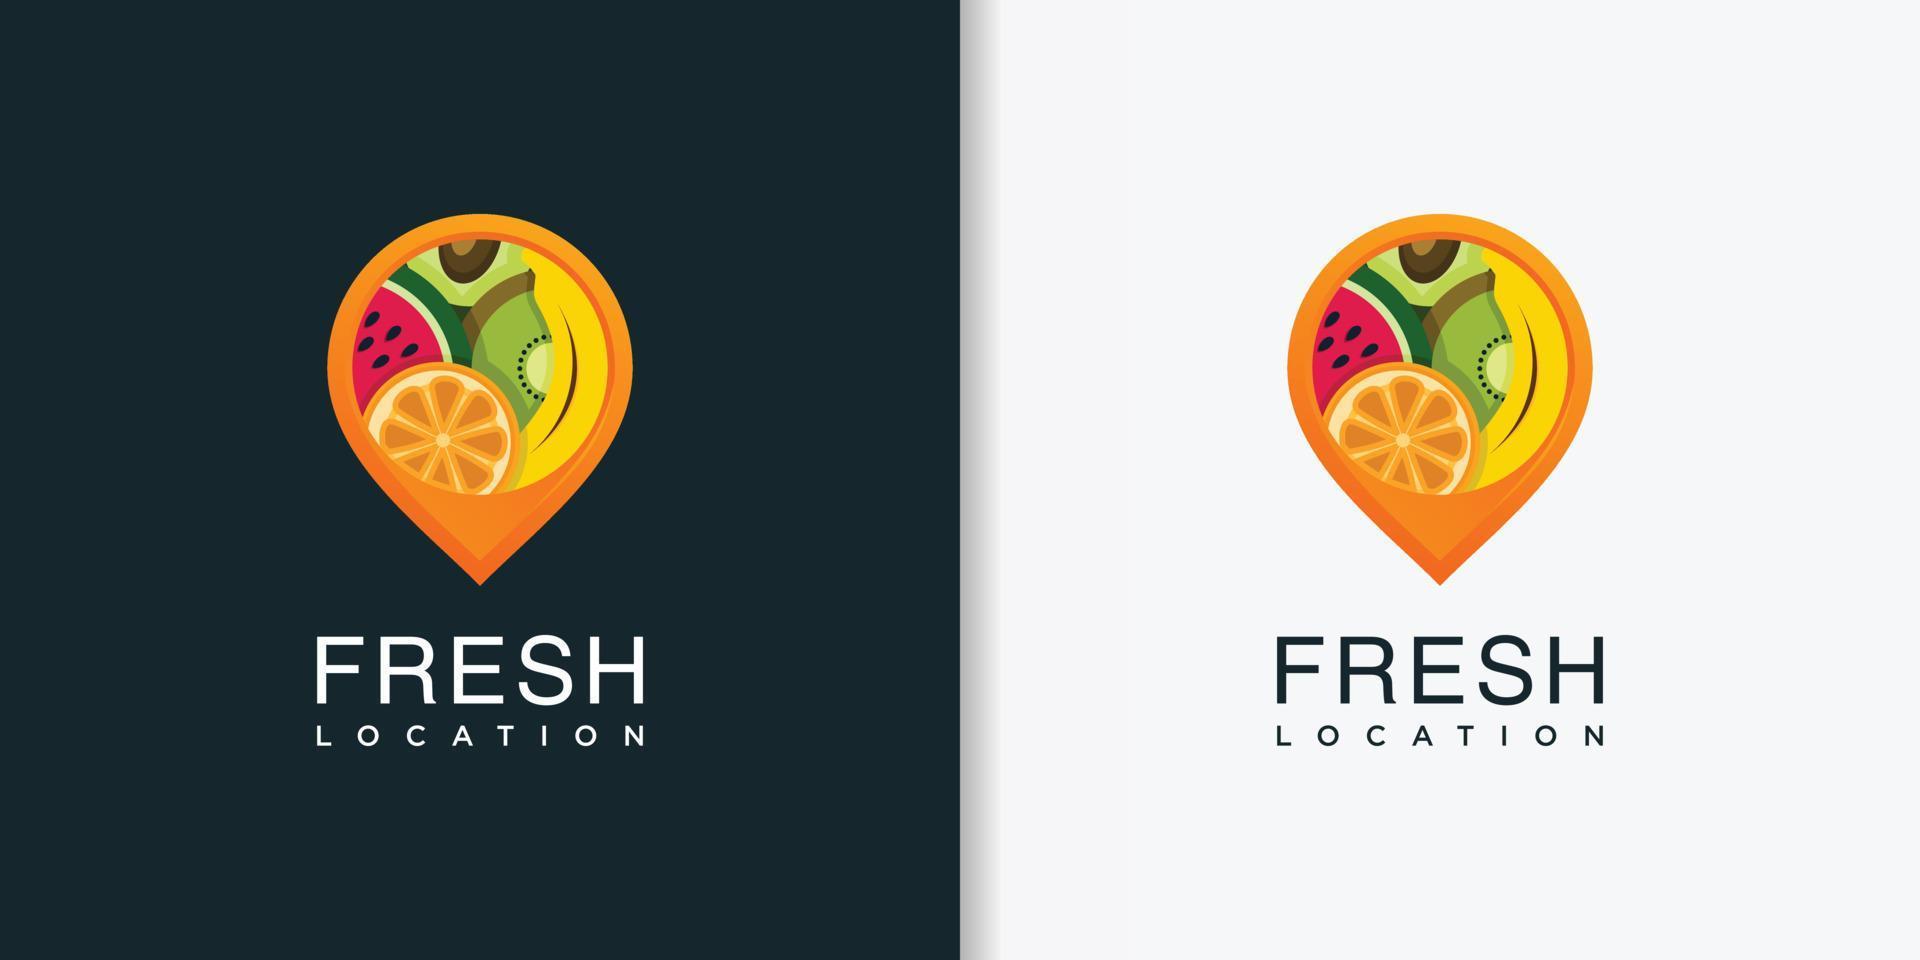 Fresh logo location with modern abstract style design template, fresh, fruit, location, pin, Premium Vector